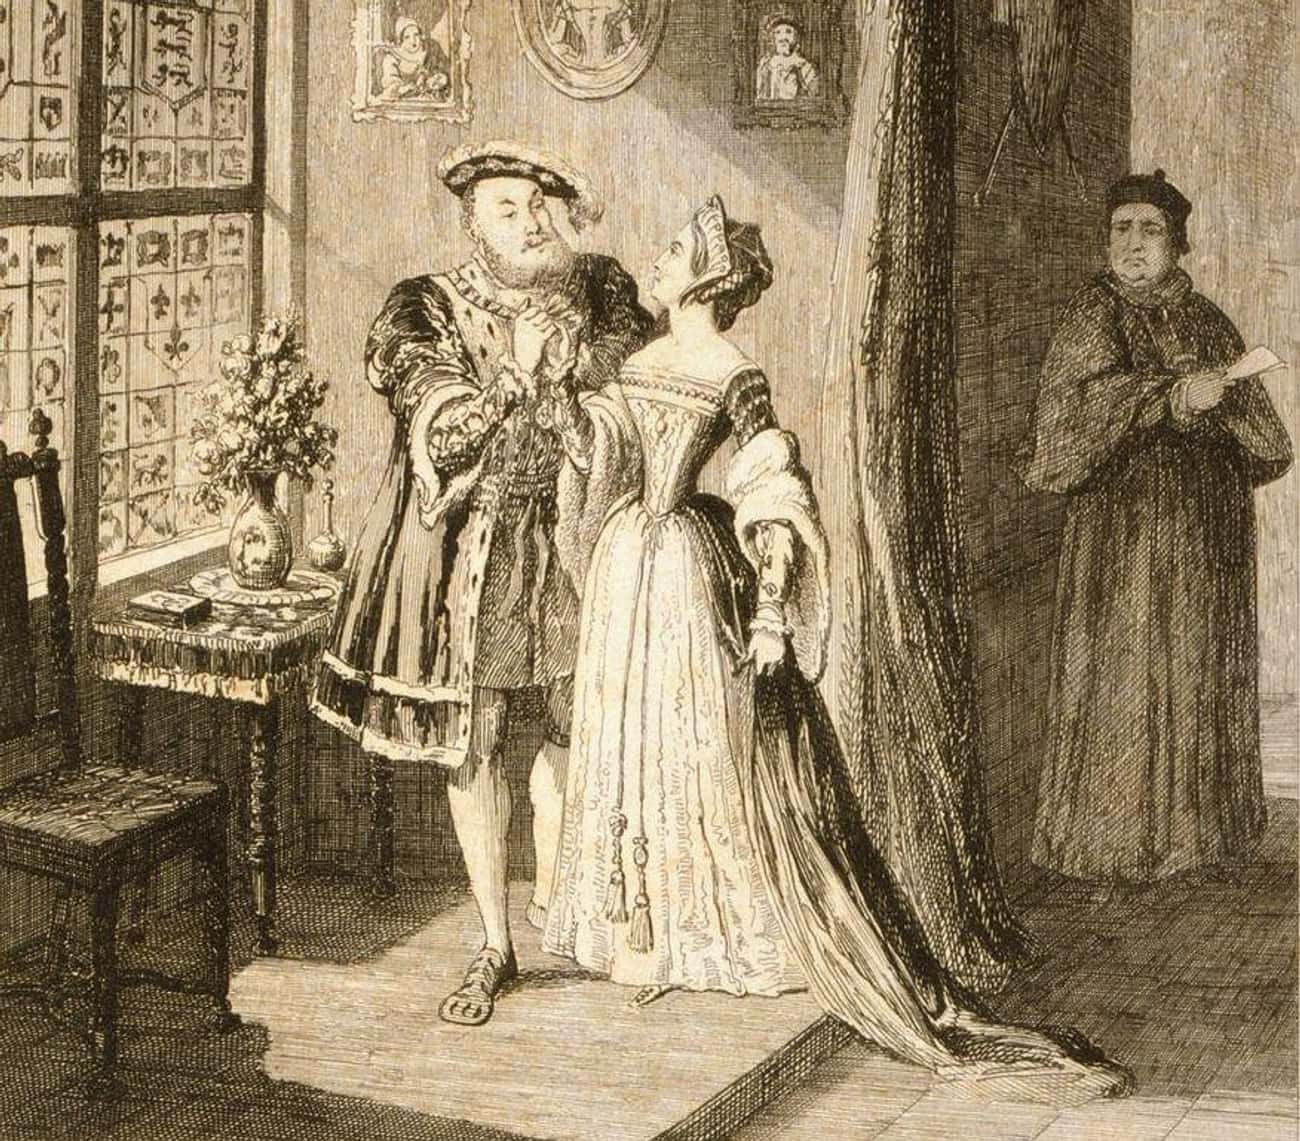 Henry VIII Helped Start A New Religion So He Could Marry His Mistress